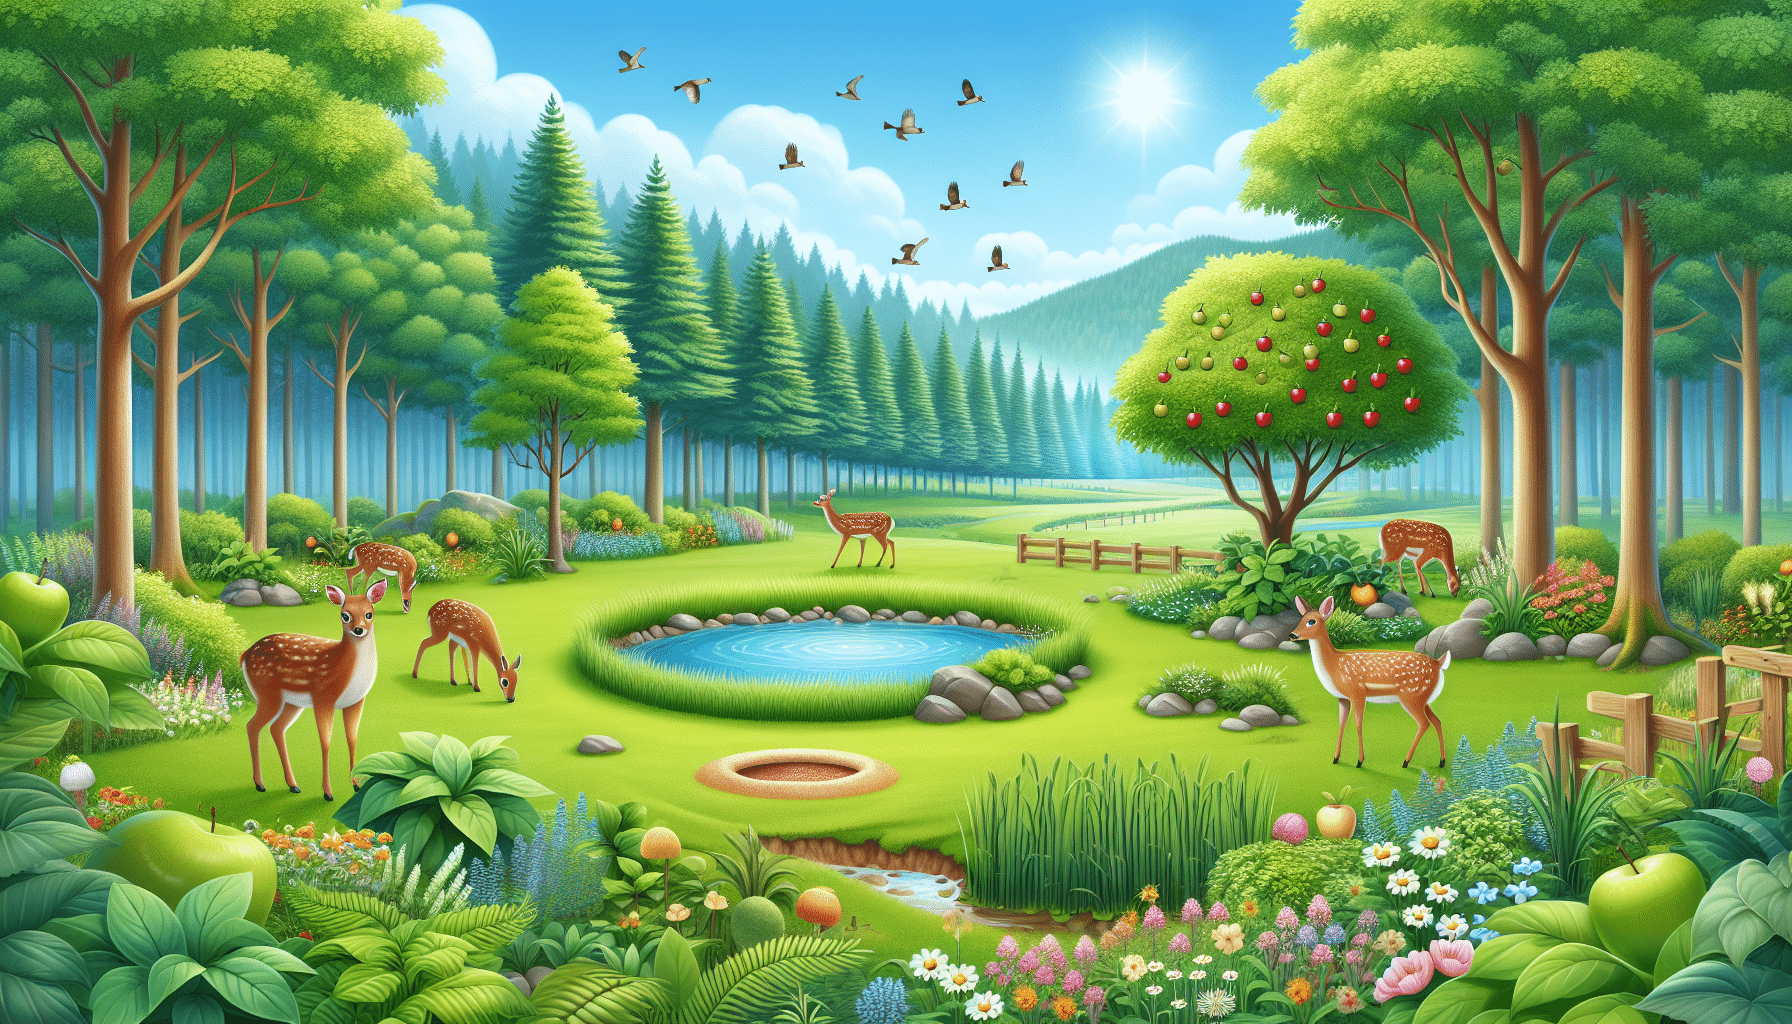 A soothing scenery perfect for attracting deer, with a lush green meadow at the heart of a forest under a clear, sunny sky. Several deer eating plants are present as well as a small body of fresh water, surrounded by wildflowers. A disguised salt lick has been placed underground, barely noticeable. Various fruit trees abound like apple, pear, and cherry. No sign of human presence, no text, no brand names, and no people are visible within the scene.